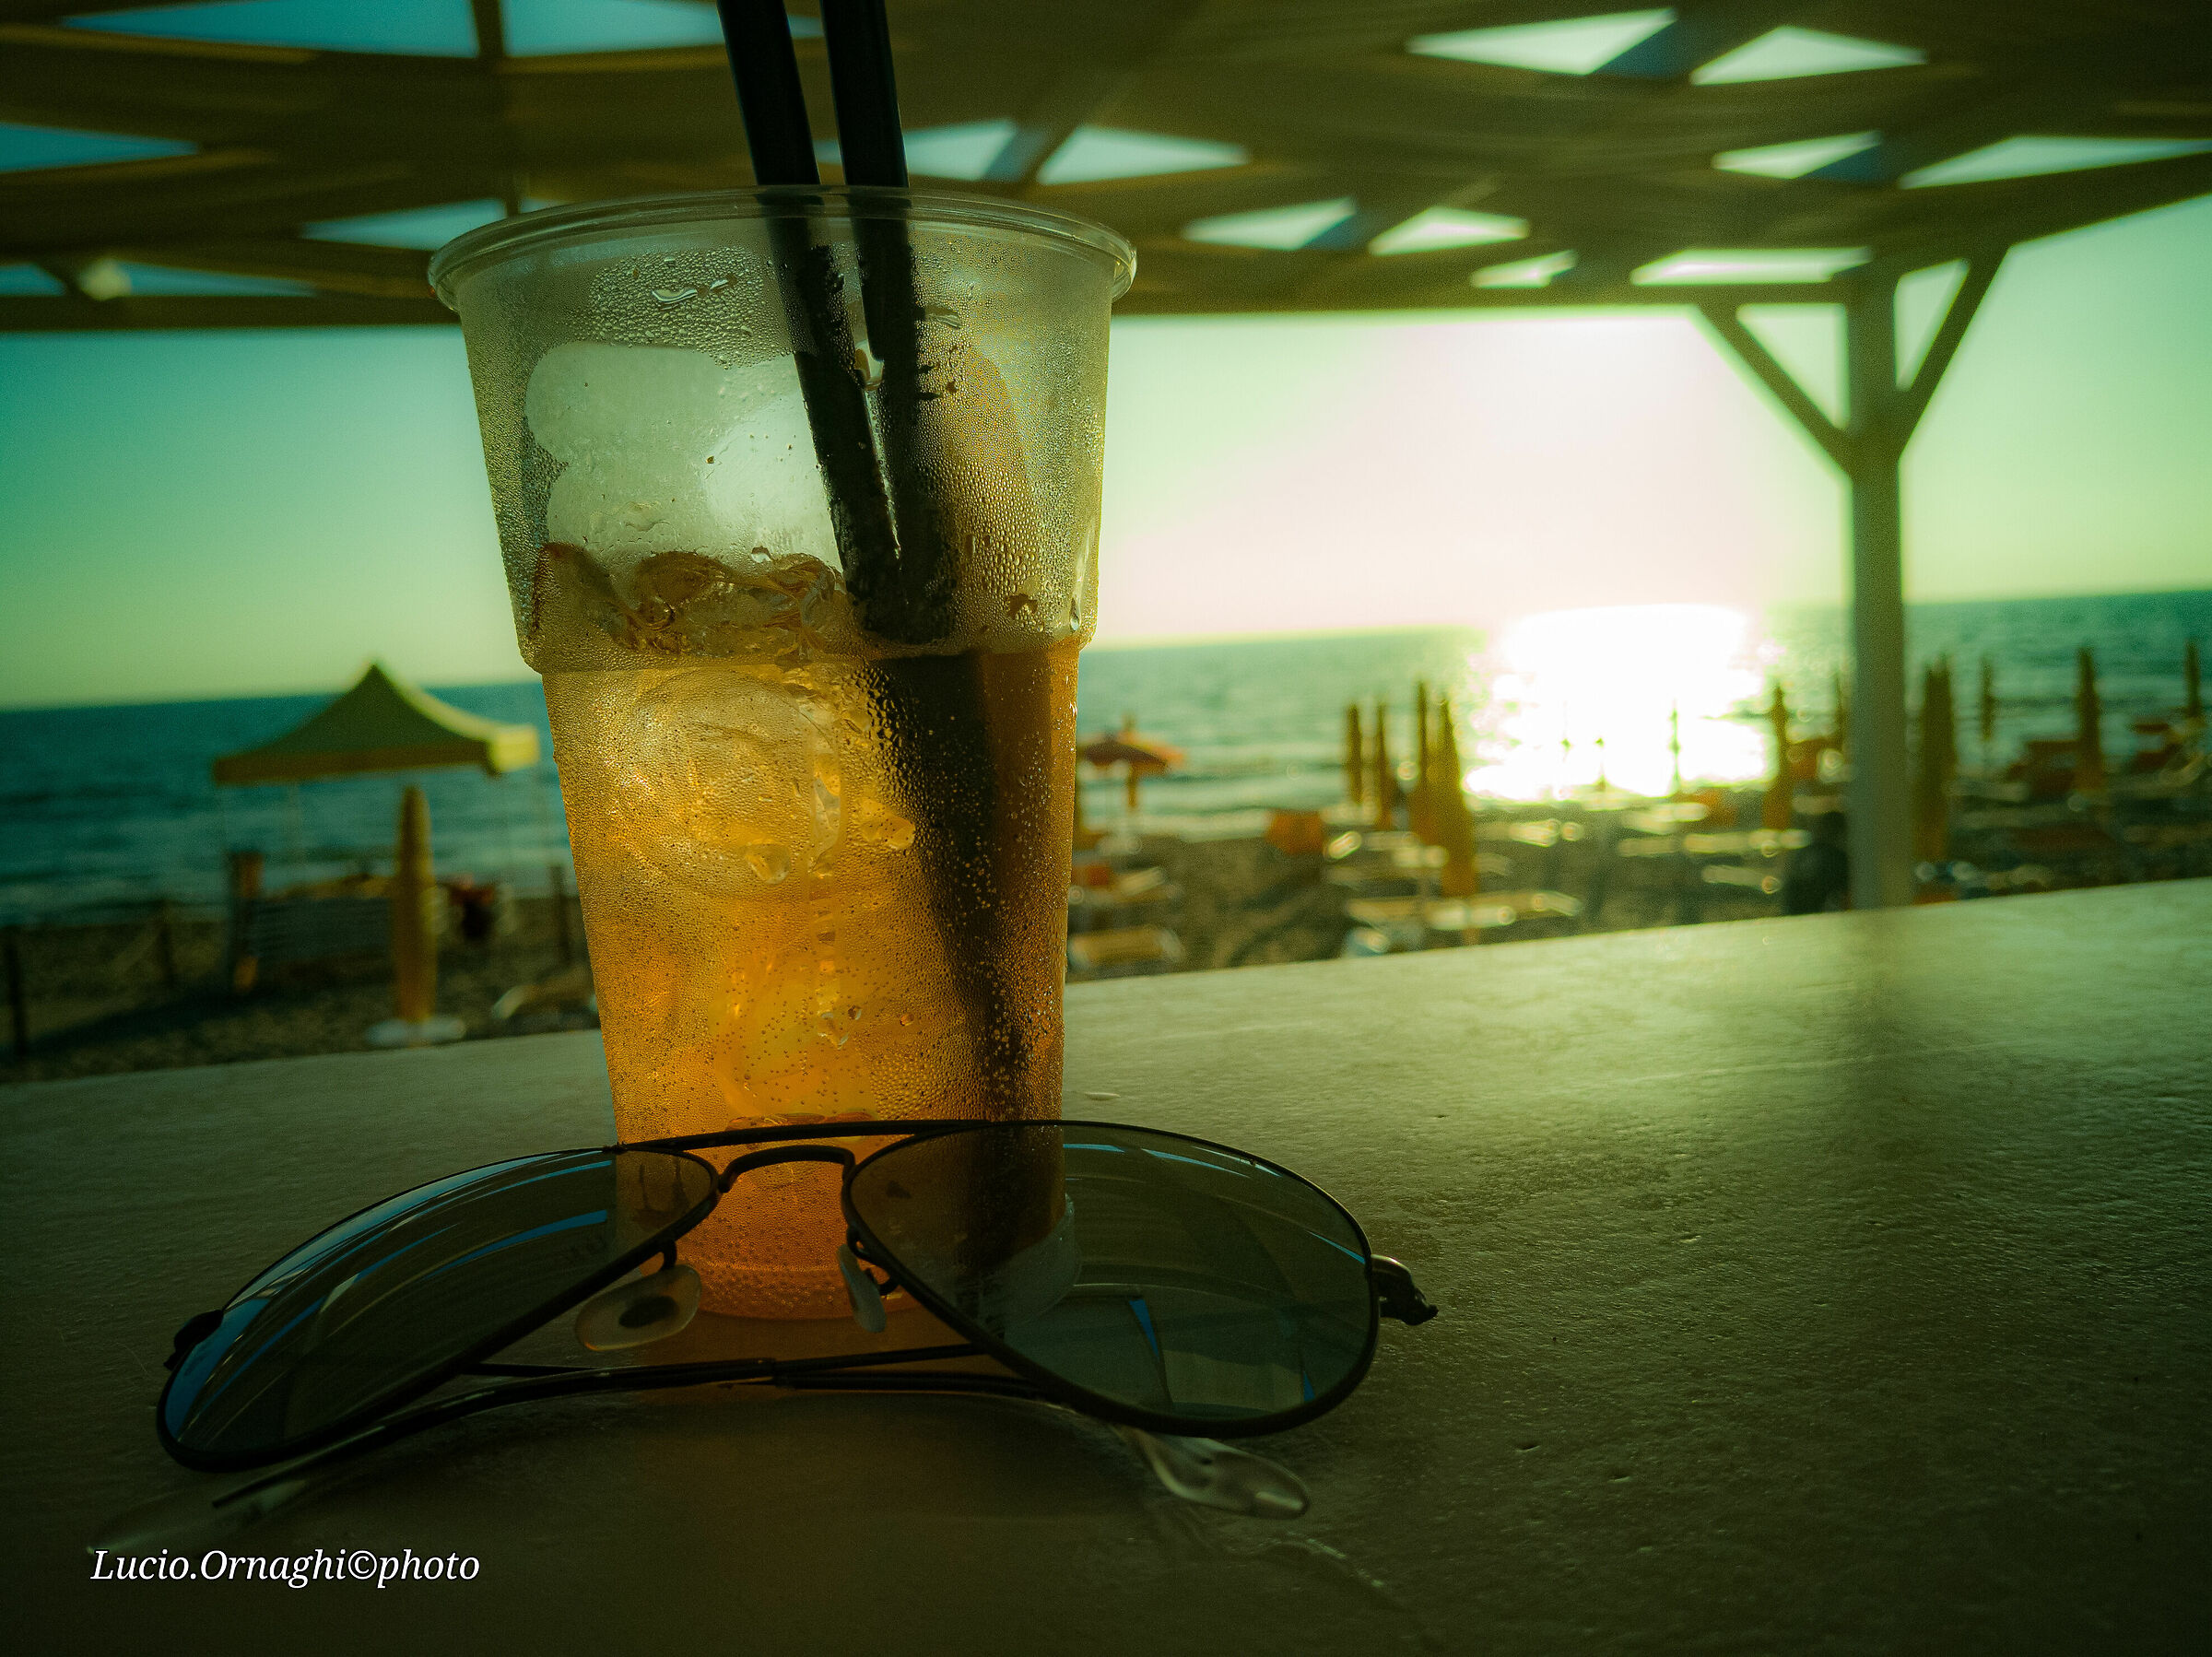 Aperitif at sunset on a special beach ...